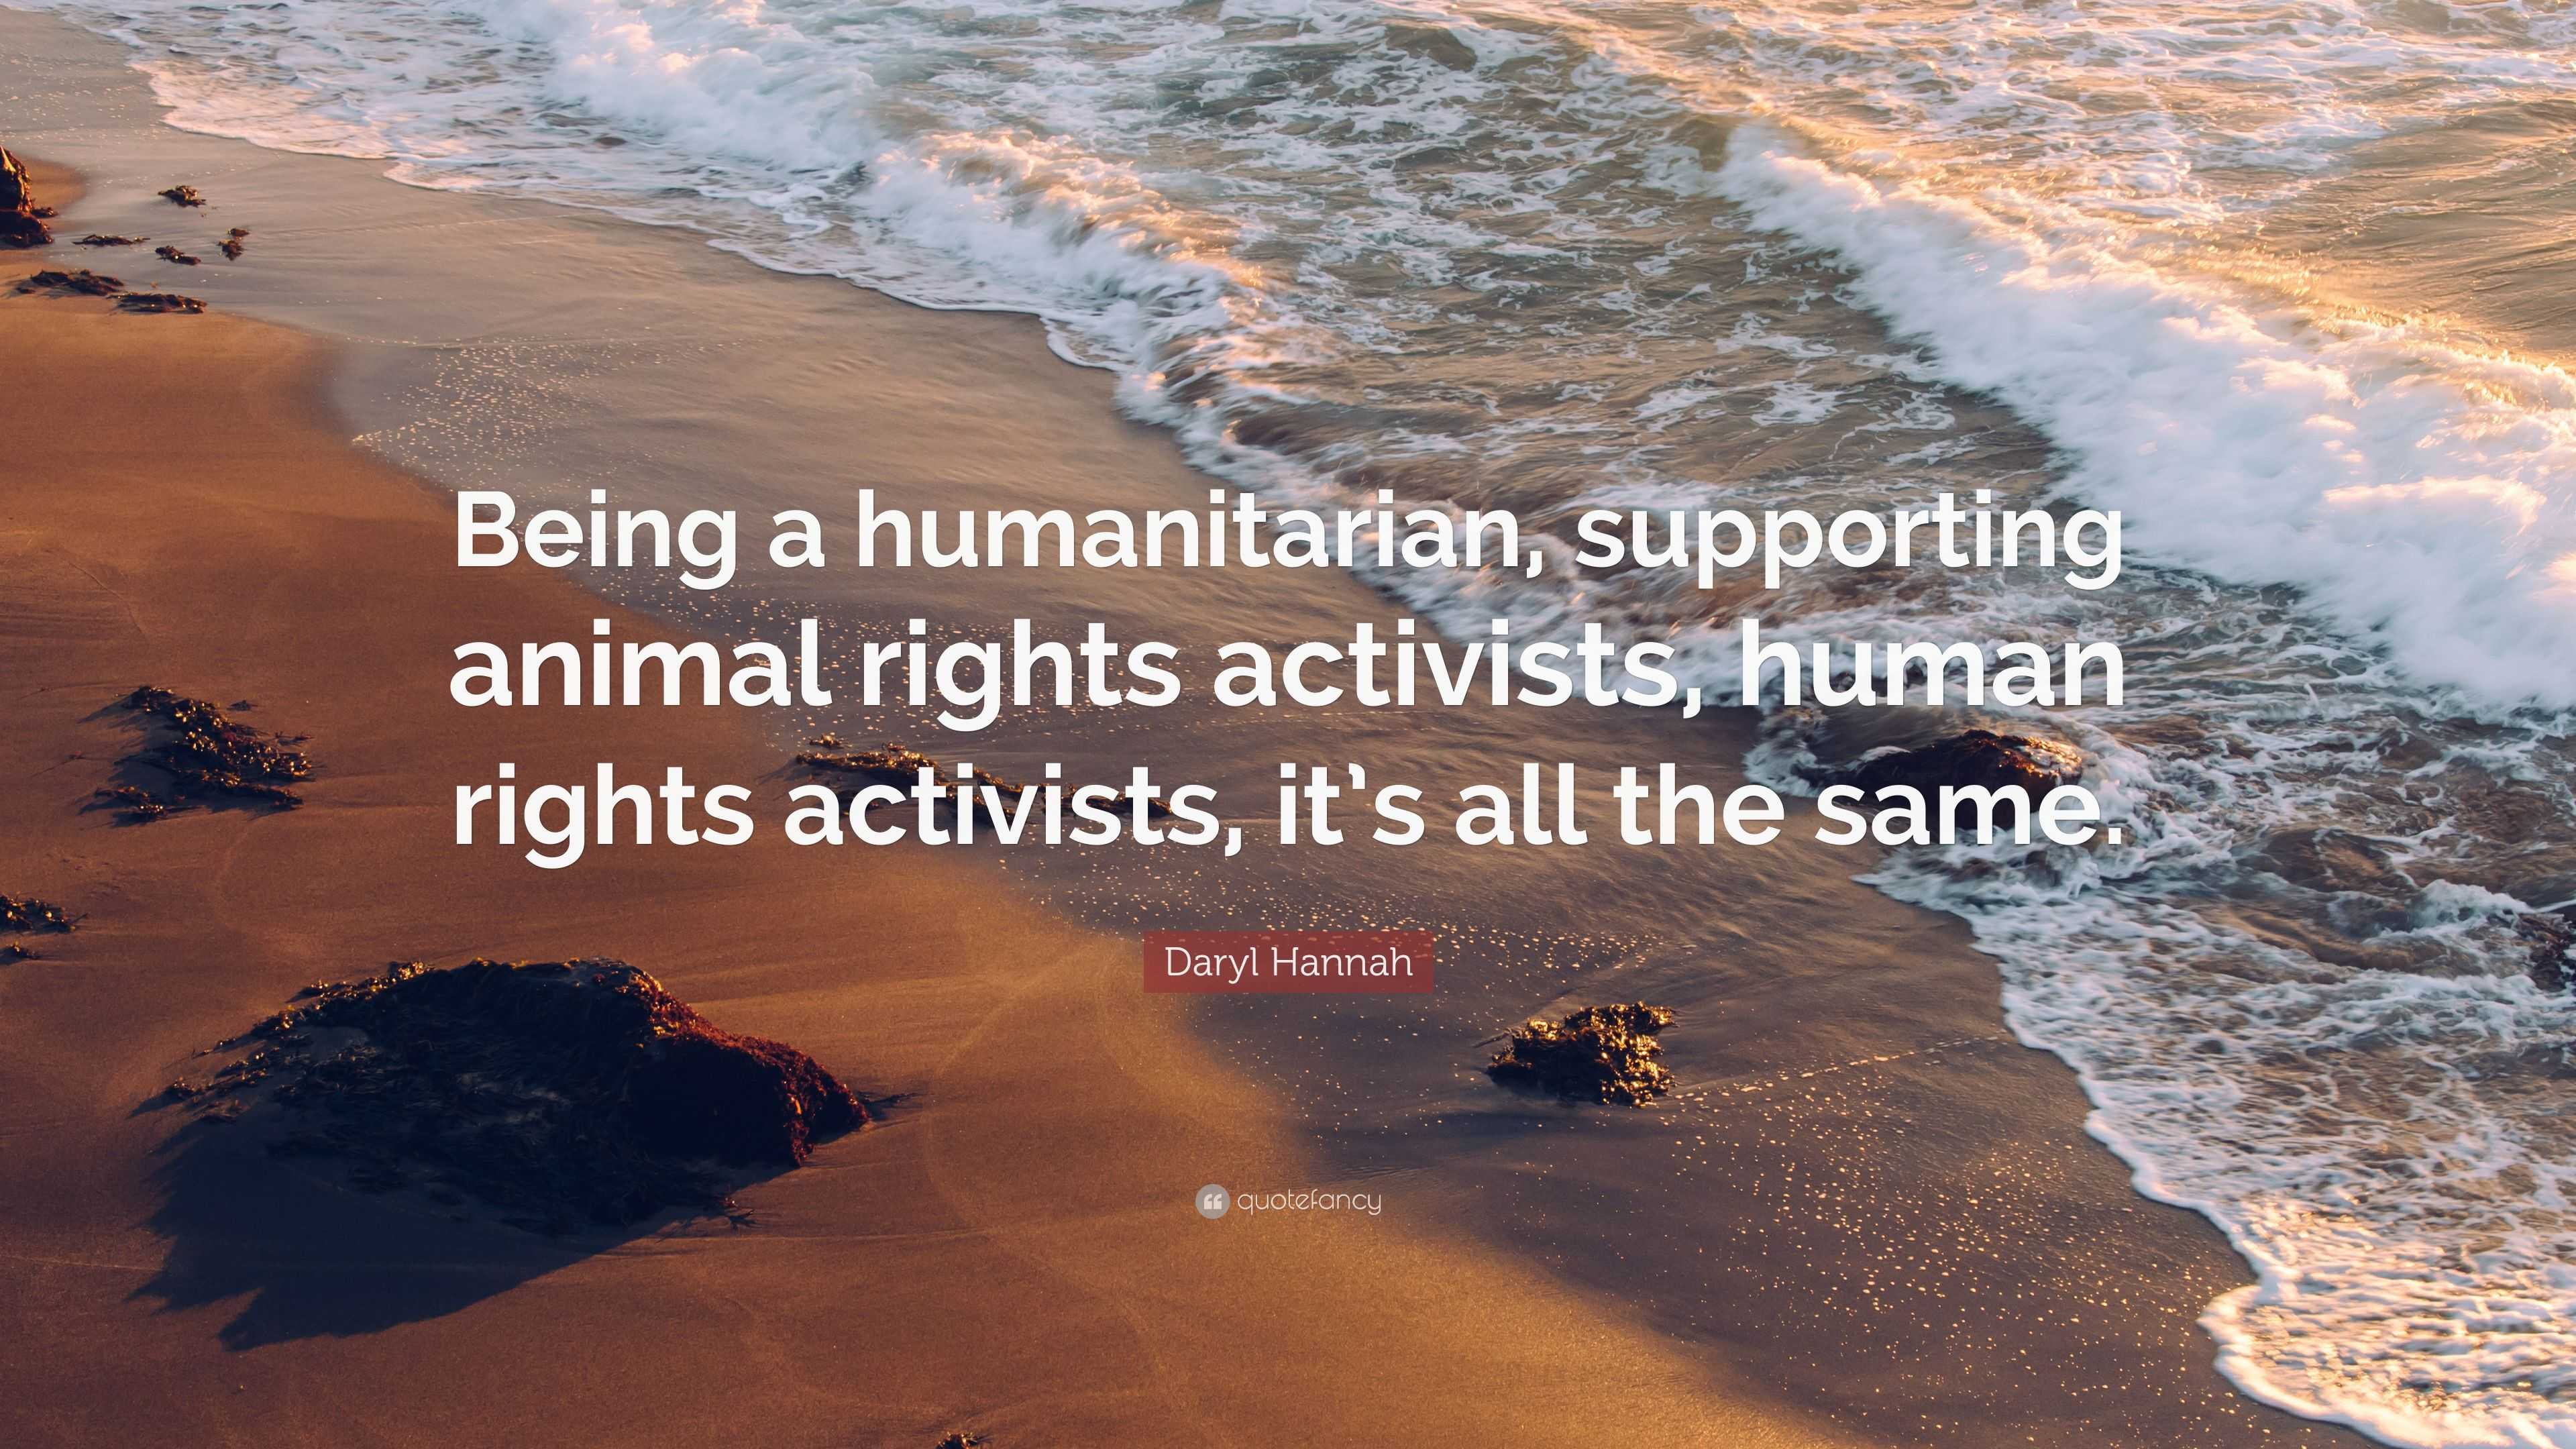 Daryl Hannah Quote: “Being a humanitarian, supporting animal rights